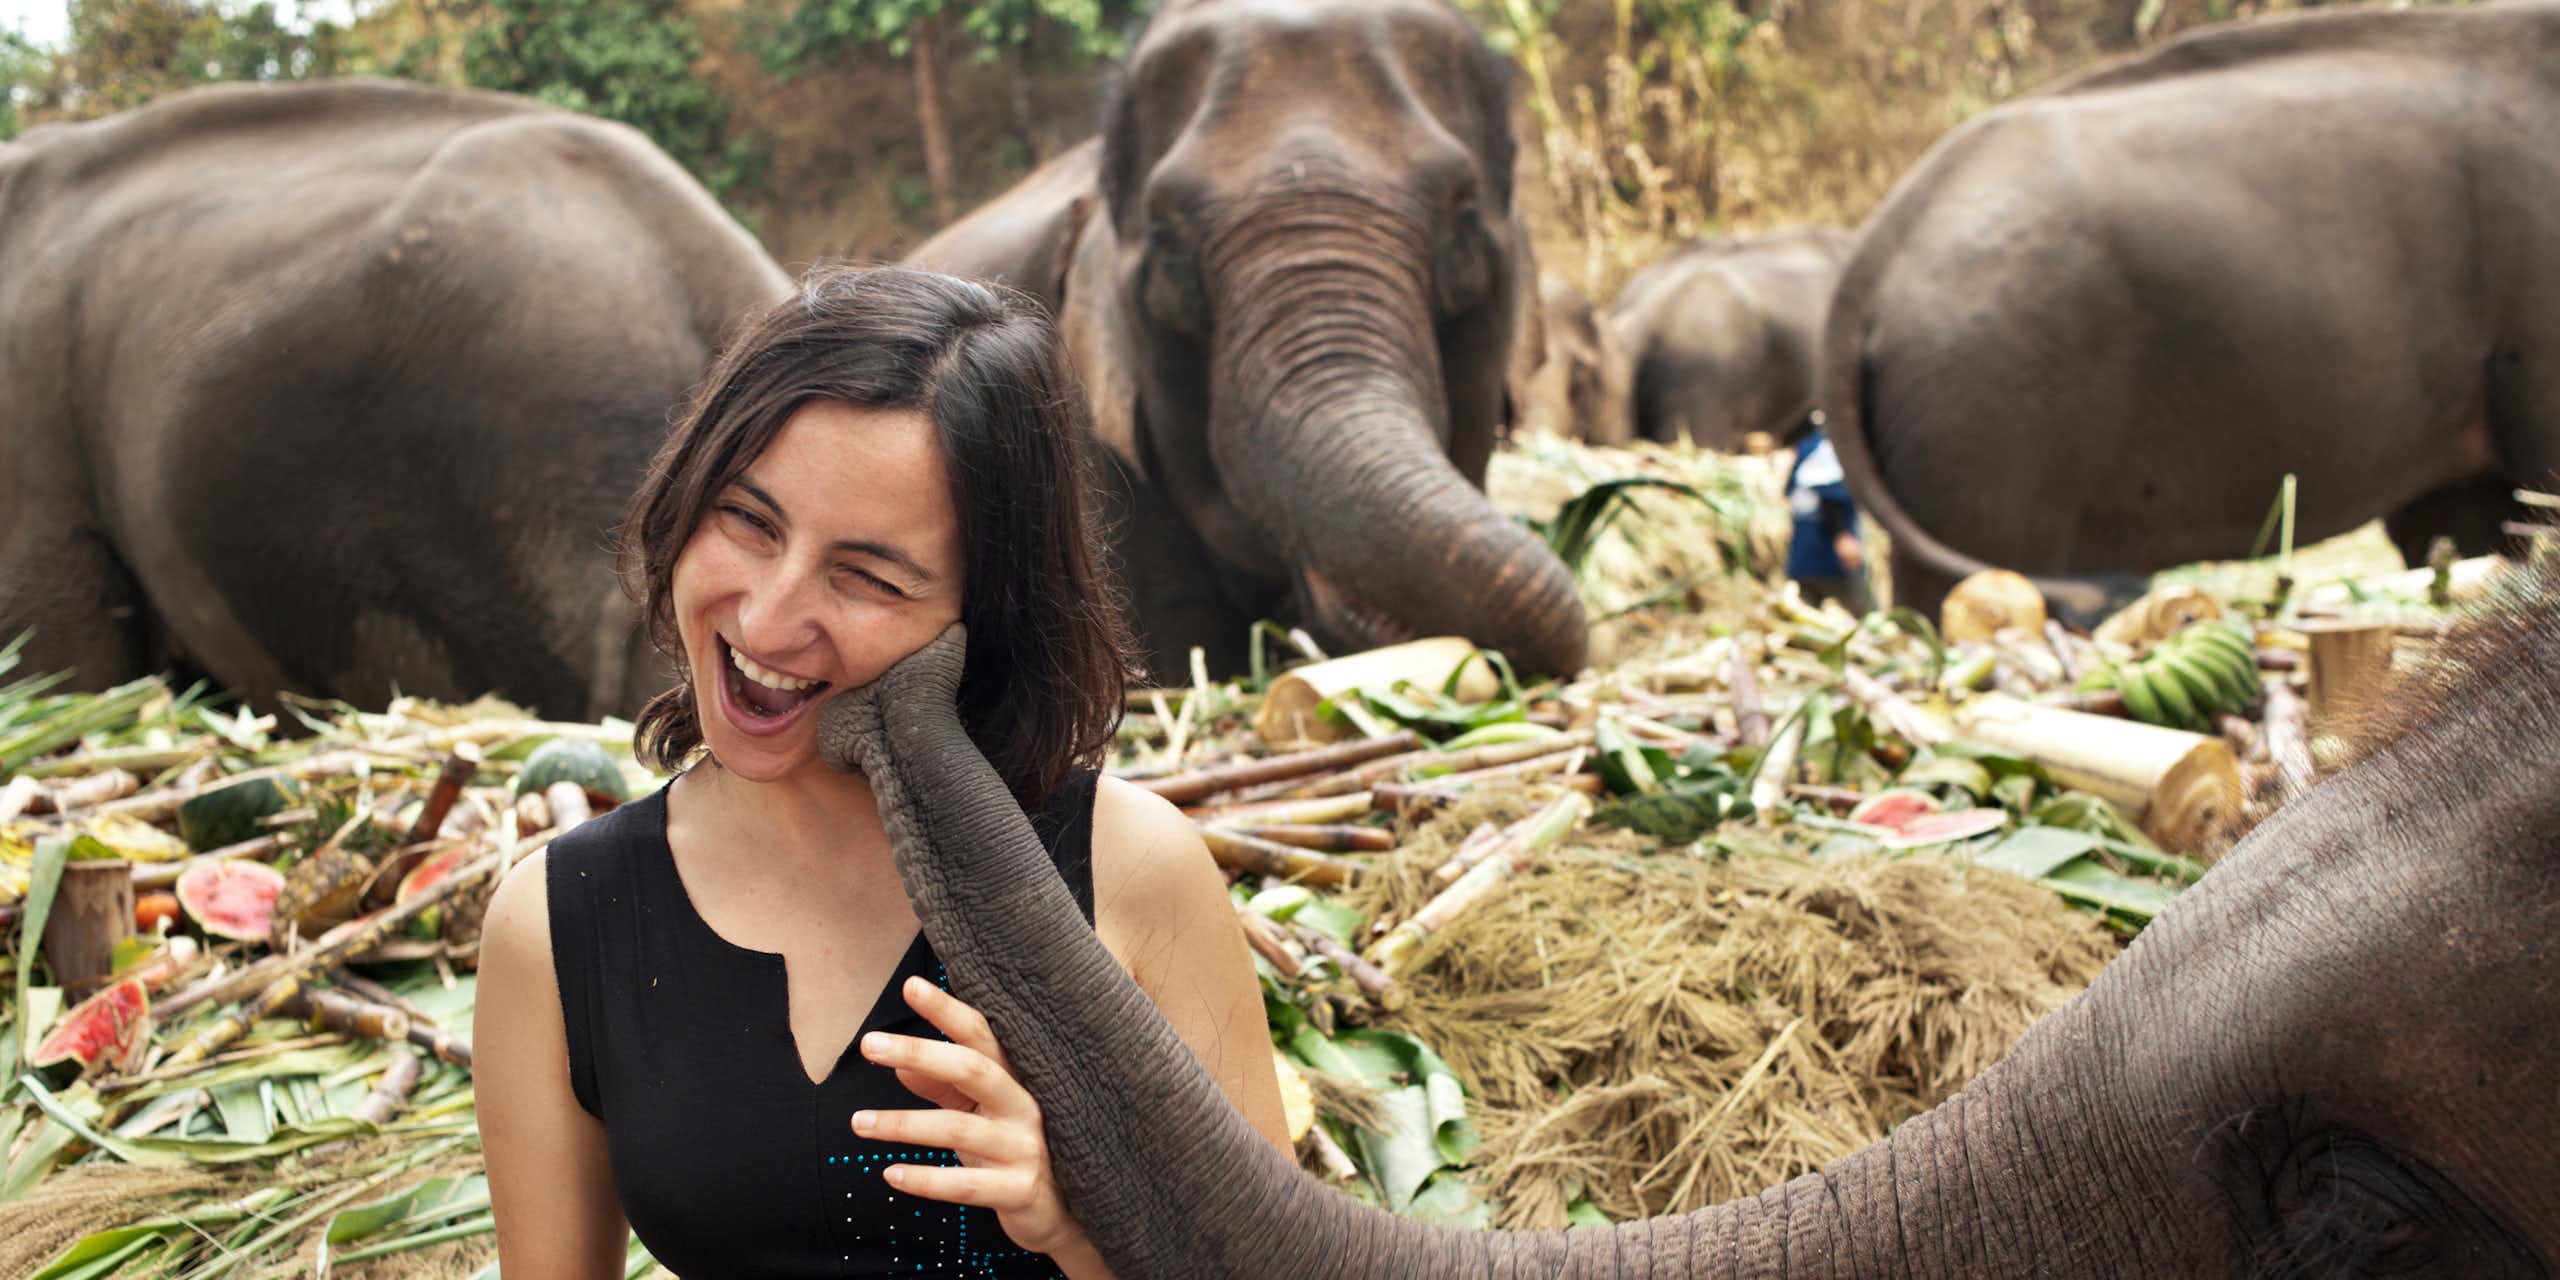 Woman laughs as an elephant puts the tip of its trunk to her cheek.